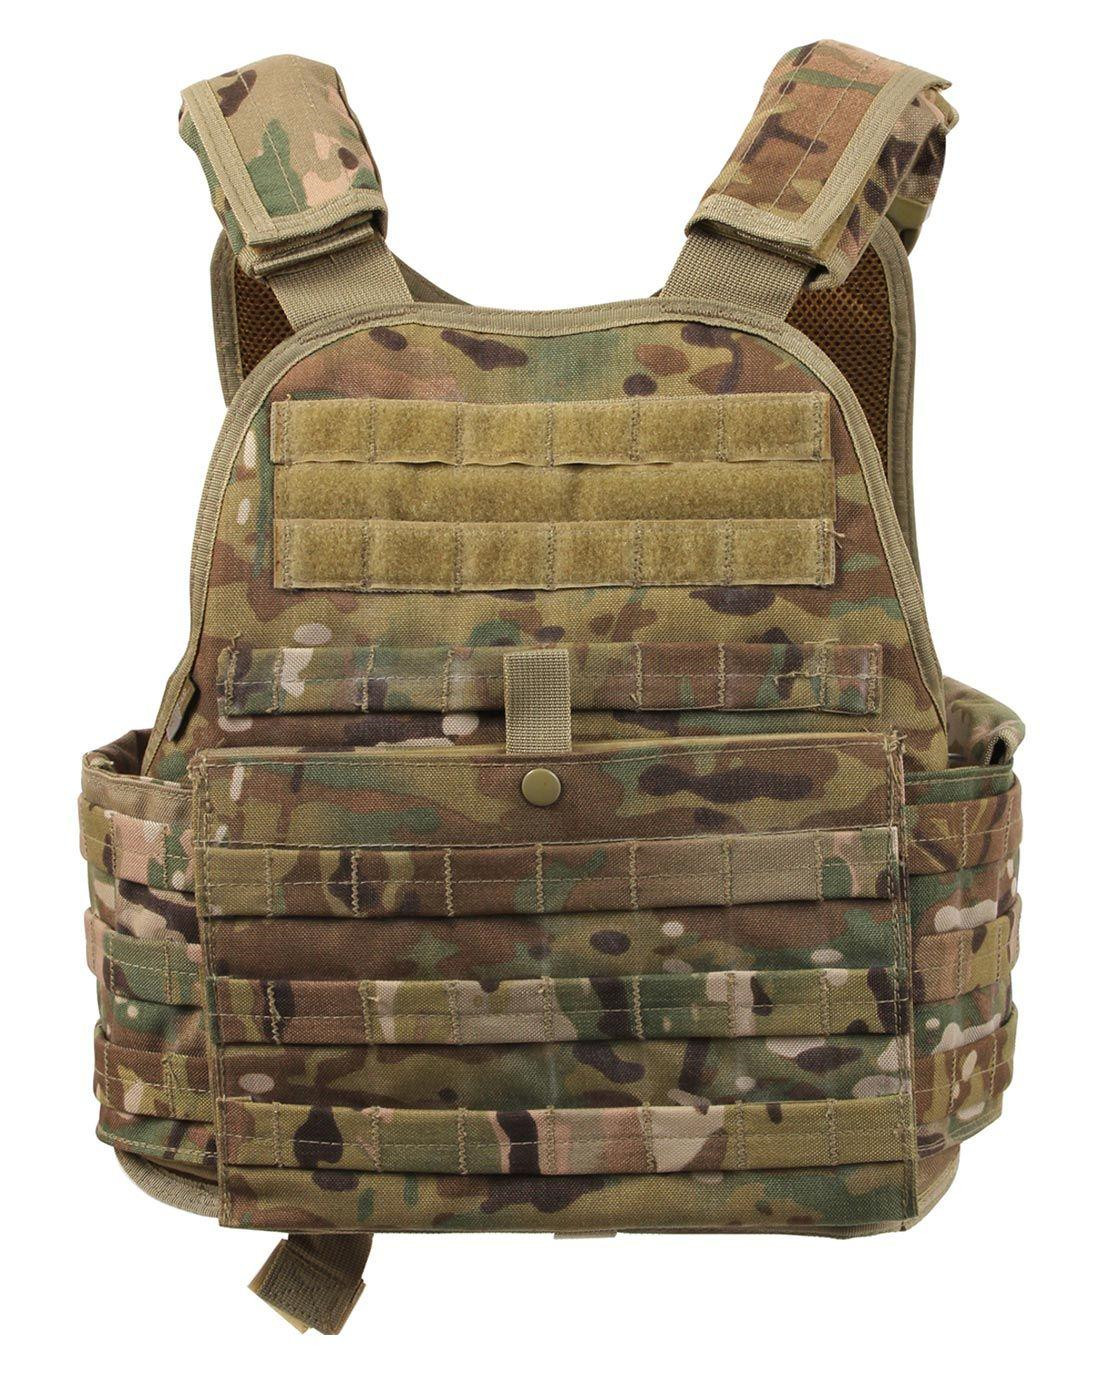 13: Rothco MOLLE Vest (Multicam, One Size)